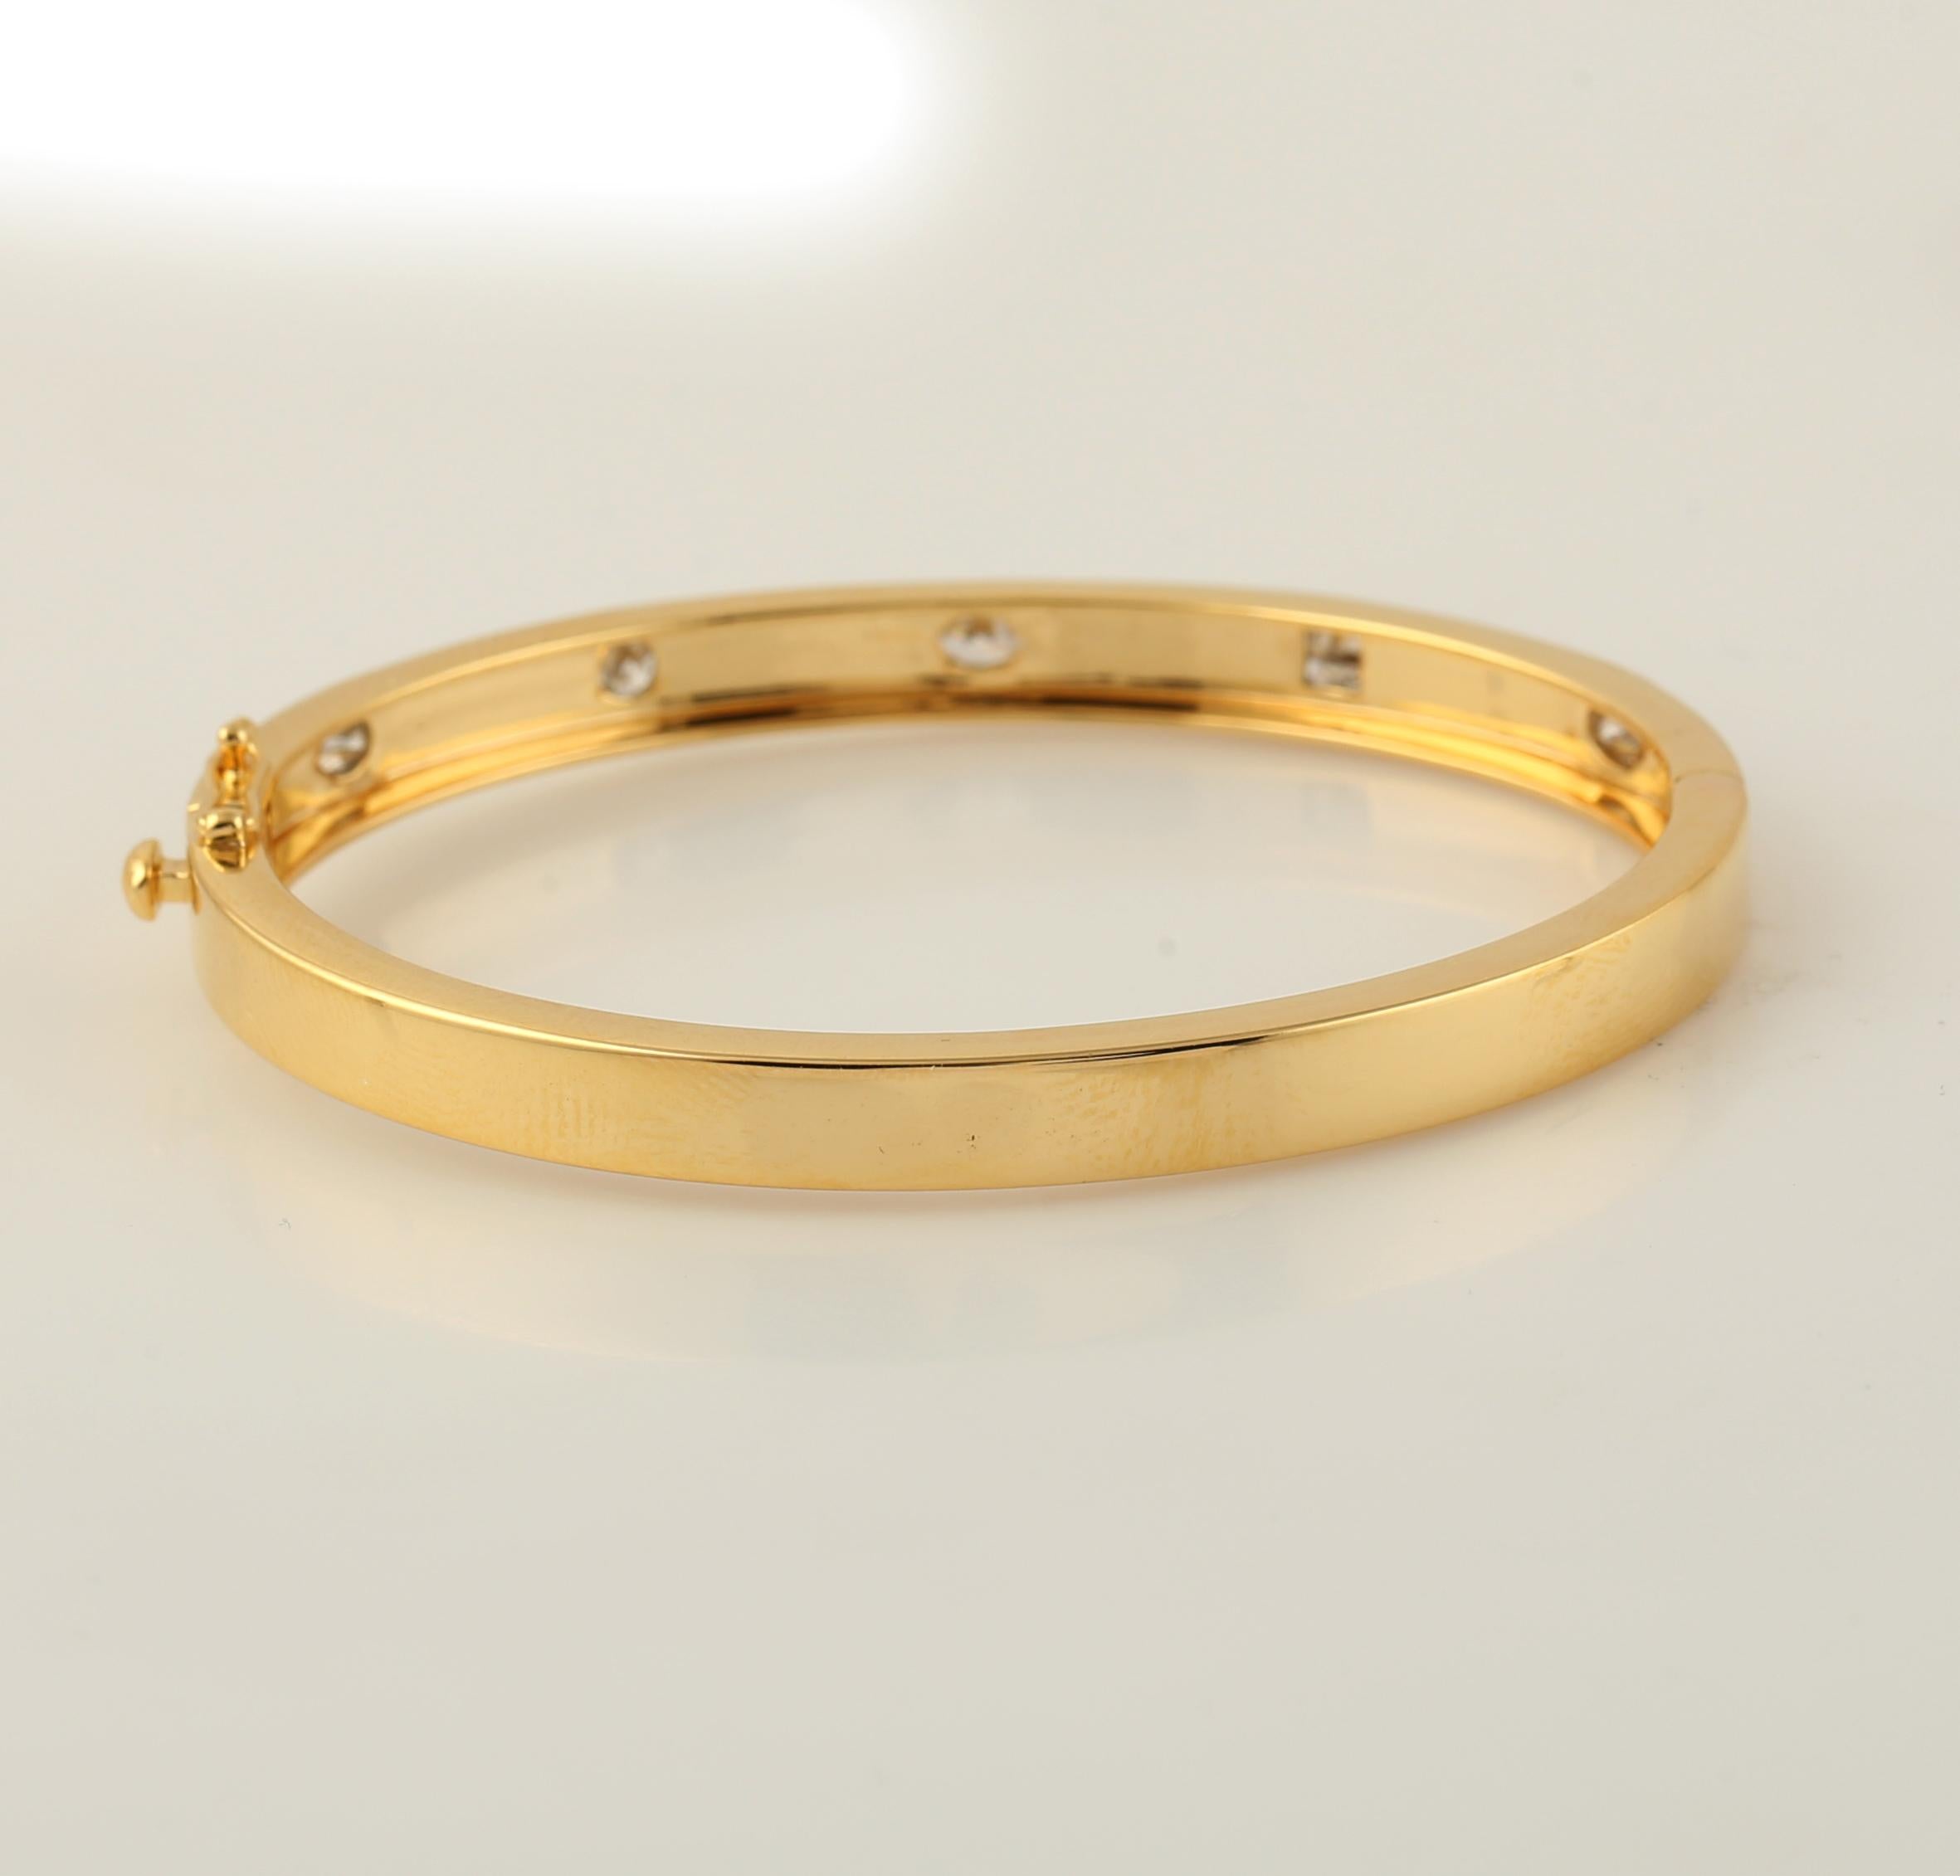 Contemporary Bezel Set Multi Shape Diamonds Bangle Made In 18K Yellow Gold For Sale